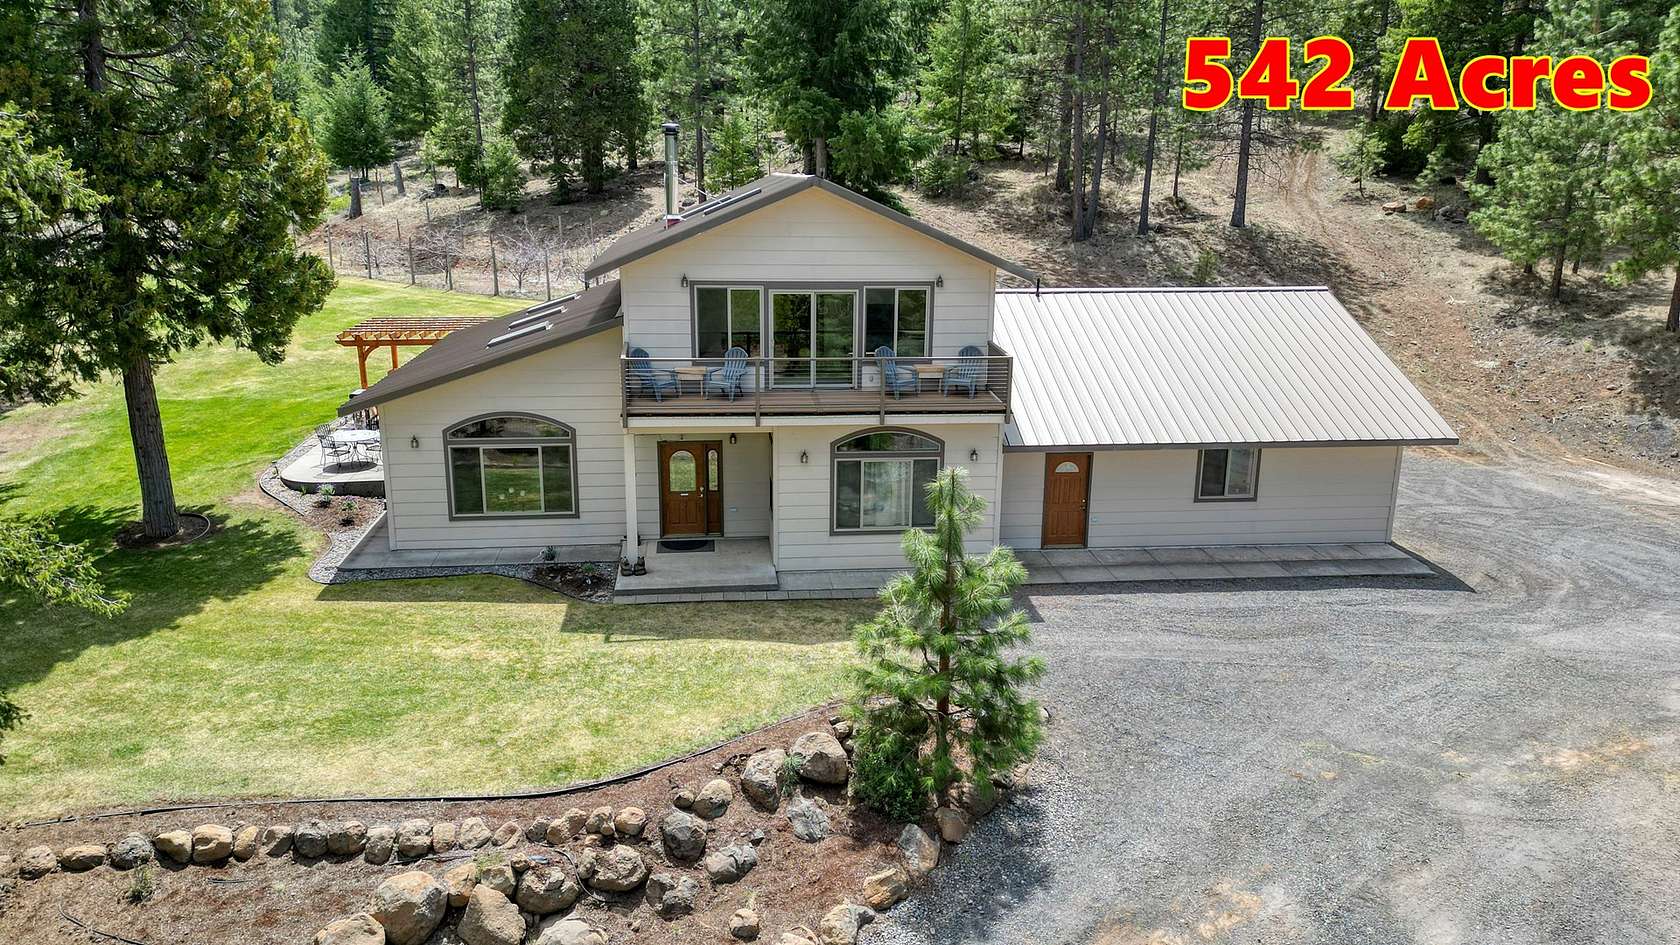 542 Acres of Land with Home for Sale in Klamath Falls, Oregon